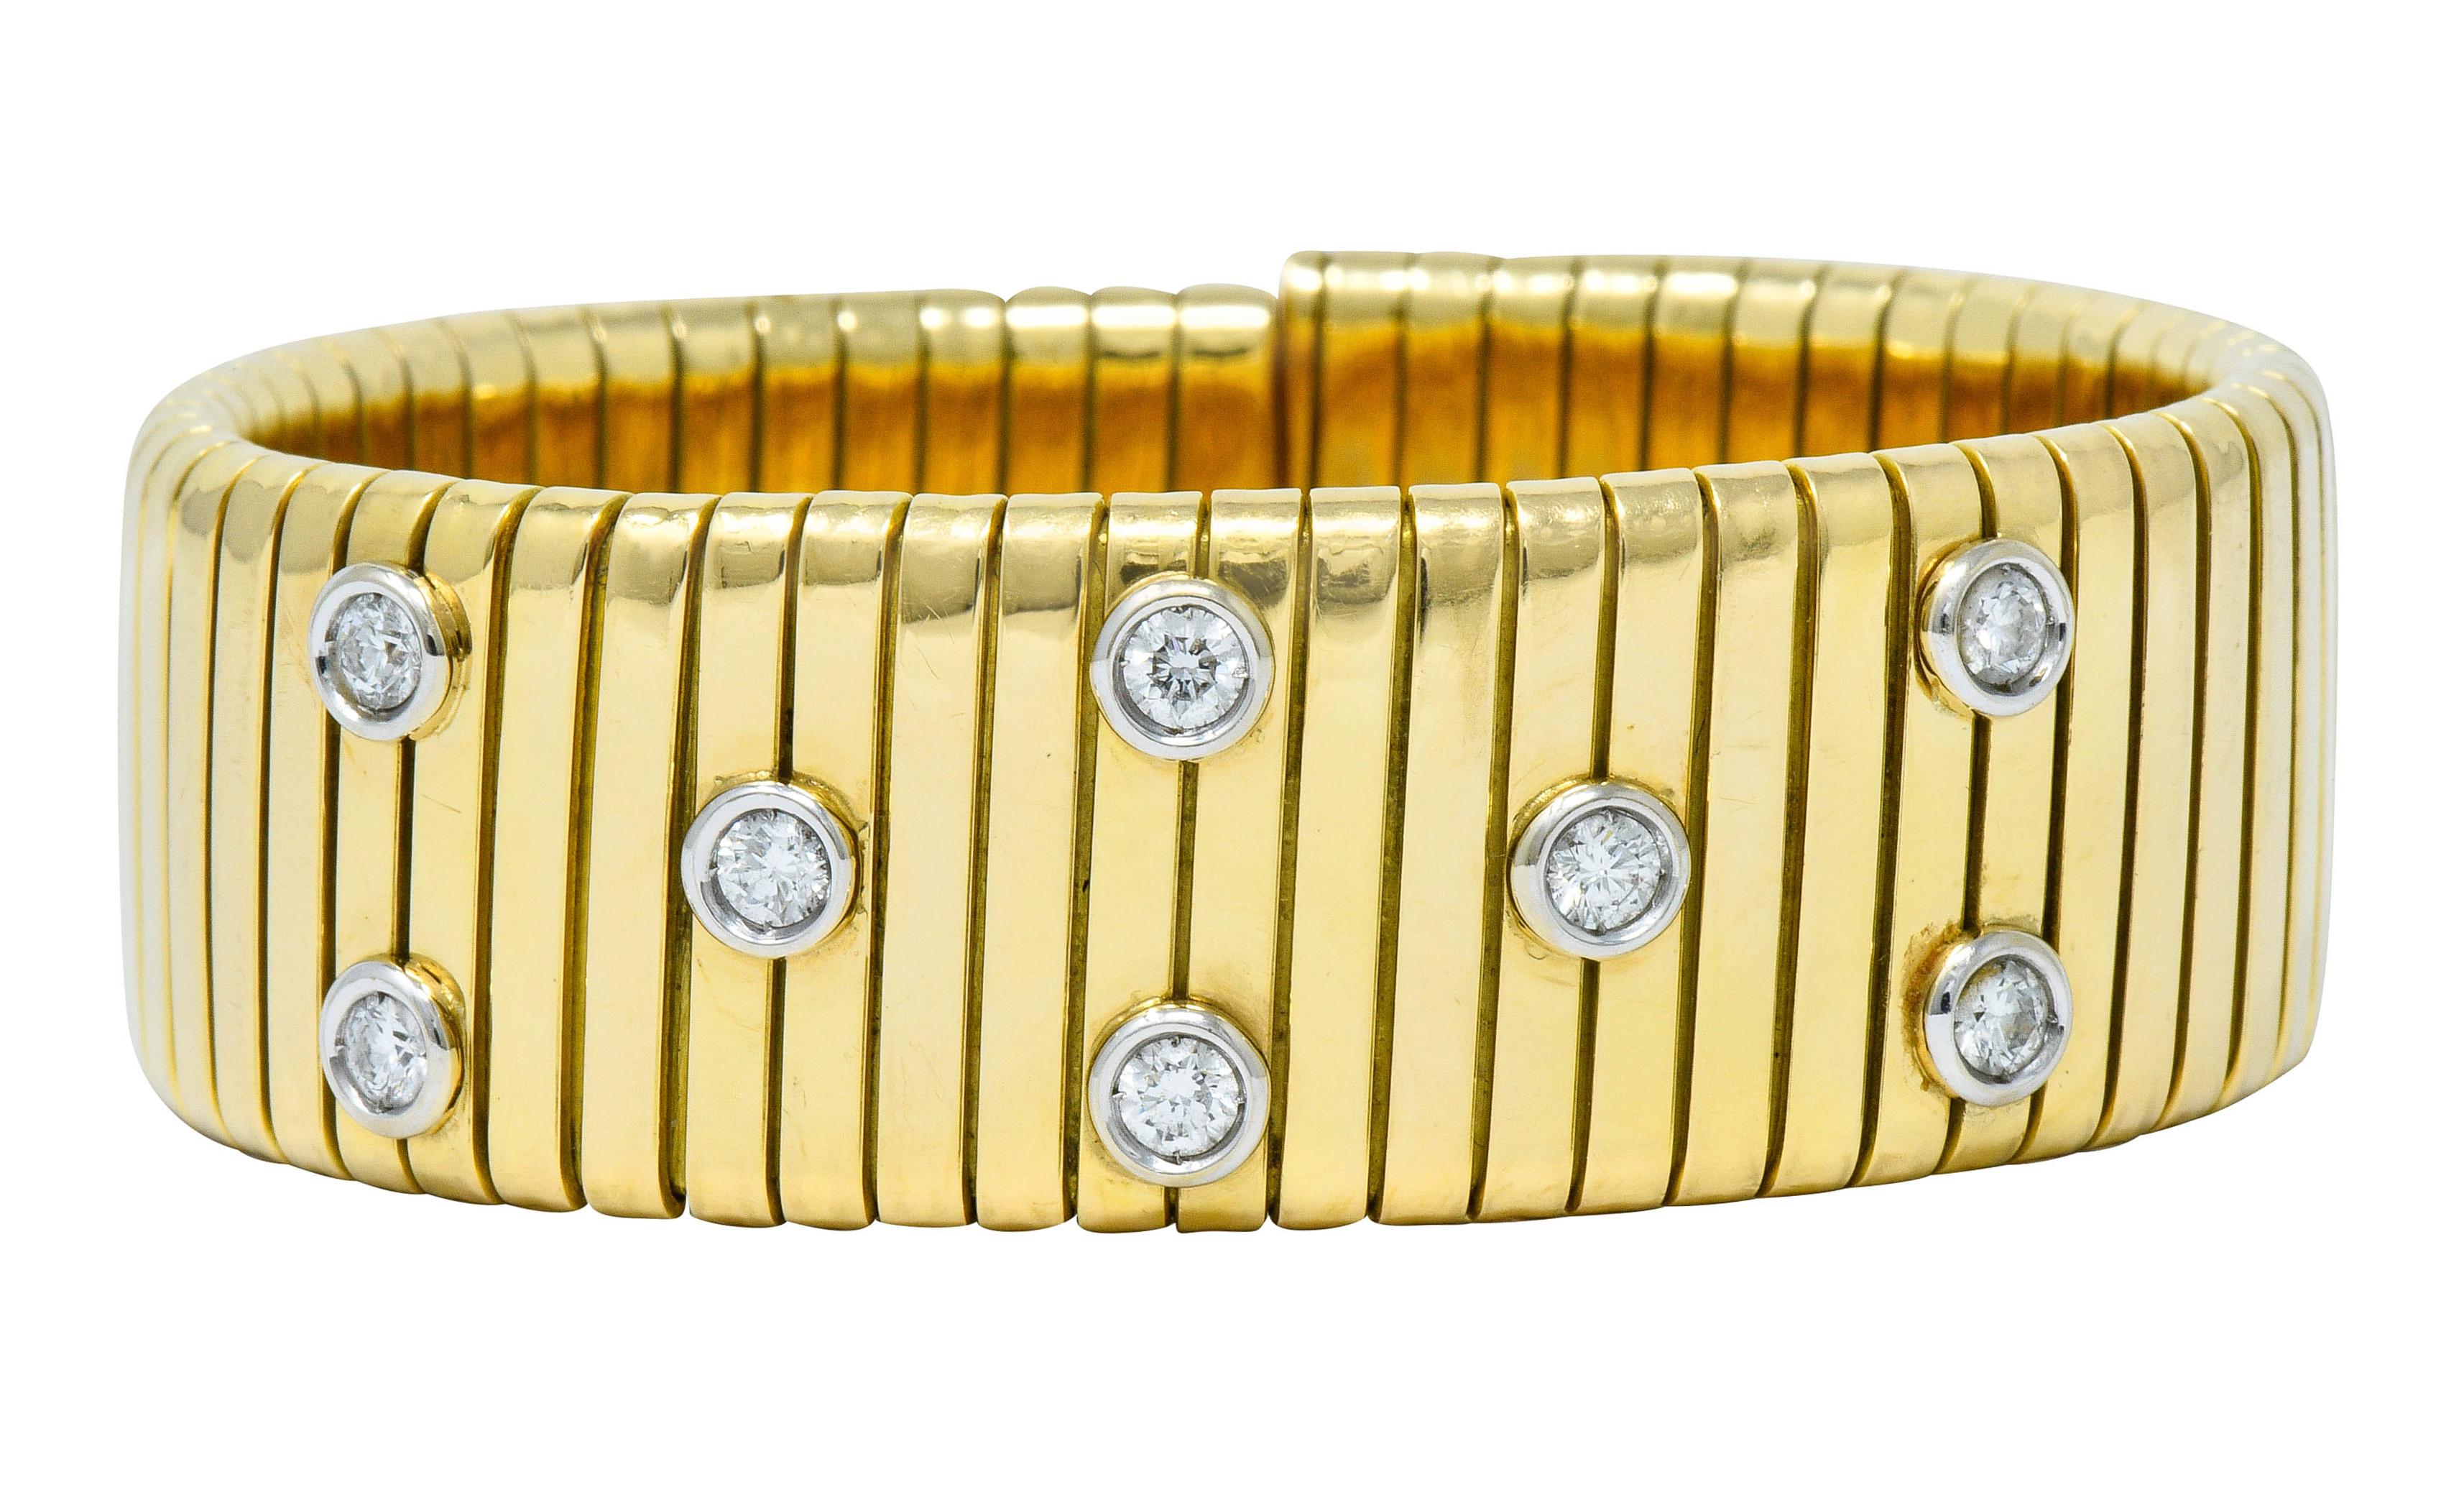 Wide cuff style bracelet comprised of flexible tubogas technology

Deeply ridged and featuring eight round brilliant cut diamonds, bezel set in 
platinum

Weighing approximately 1.45 carats with H/I color and VS clarity

With Italian assay marks for